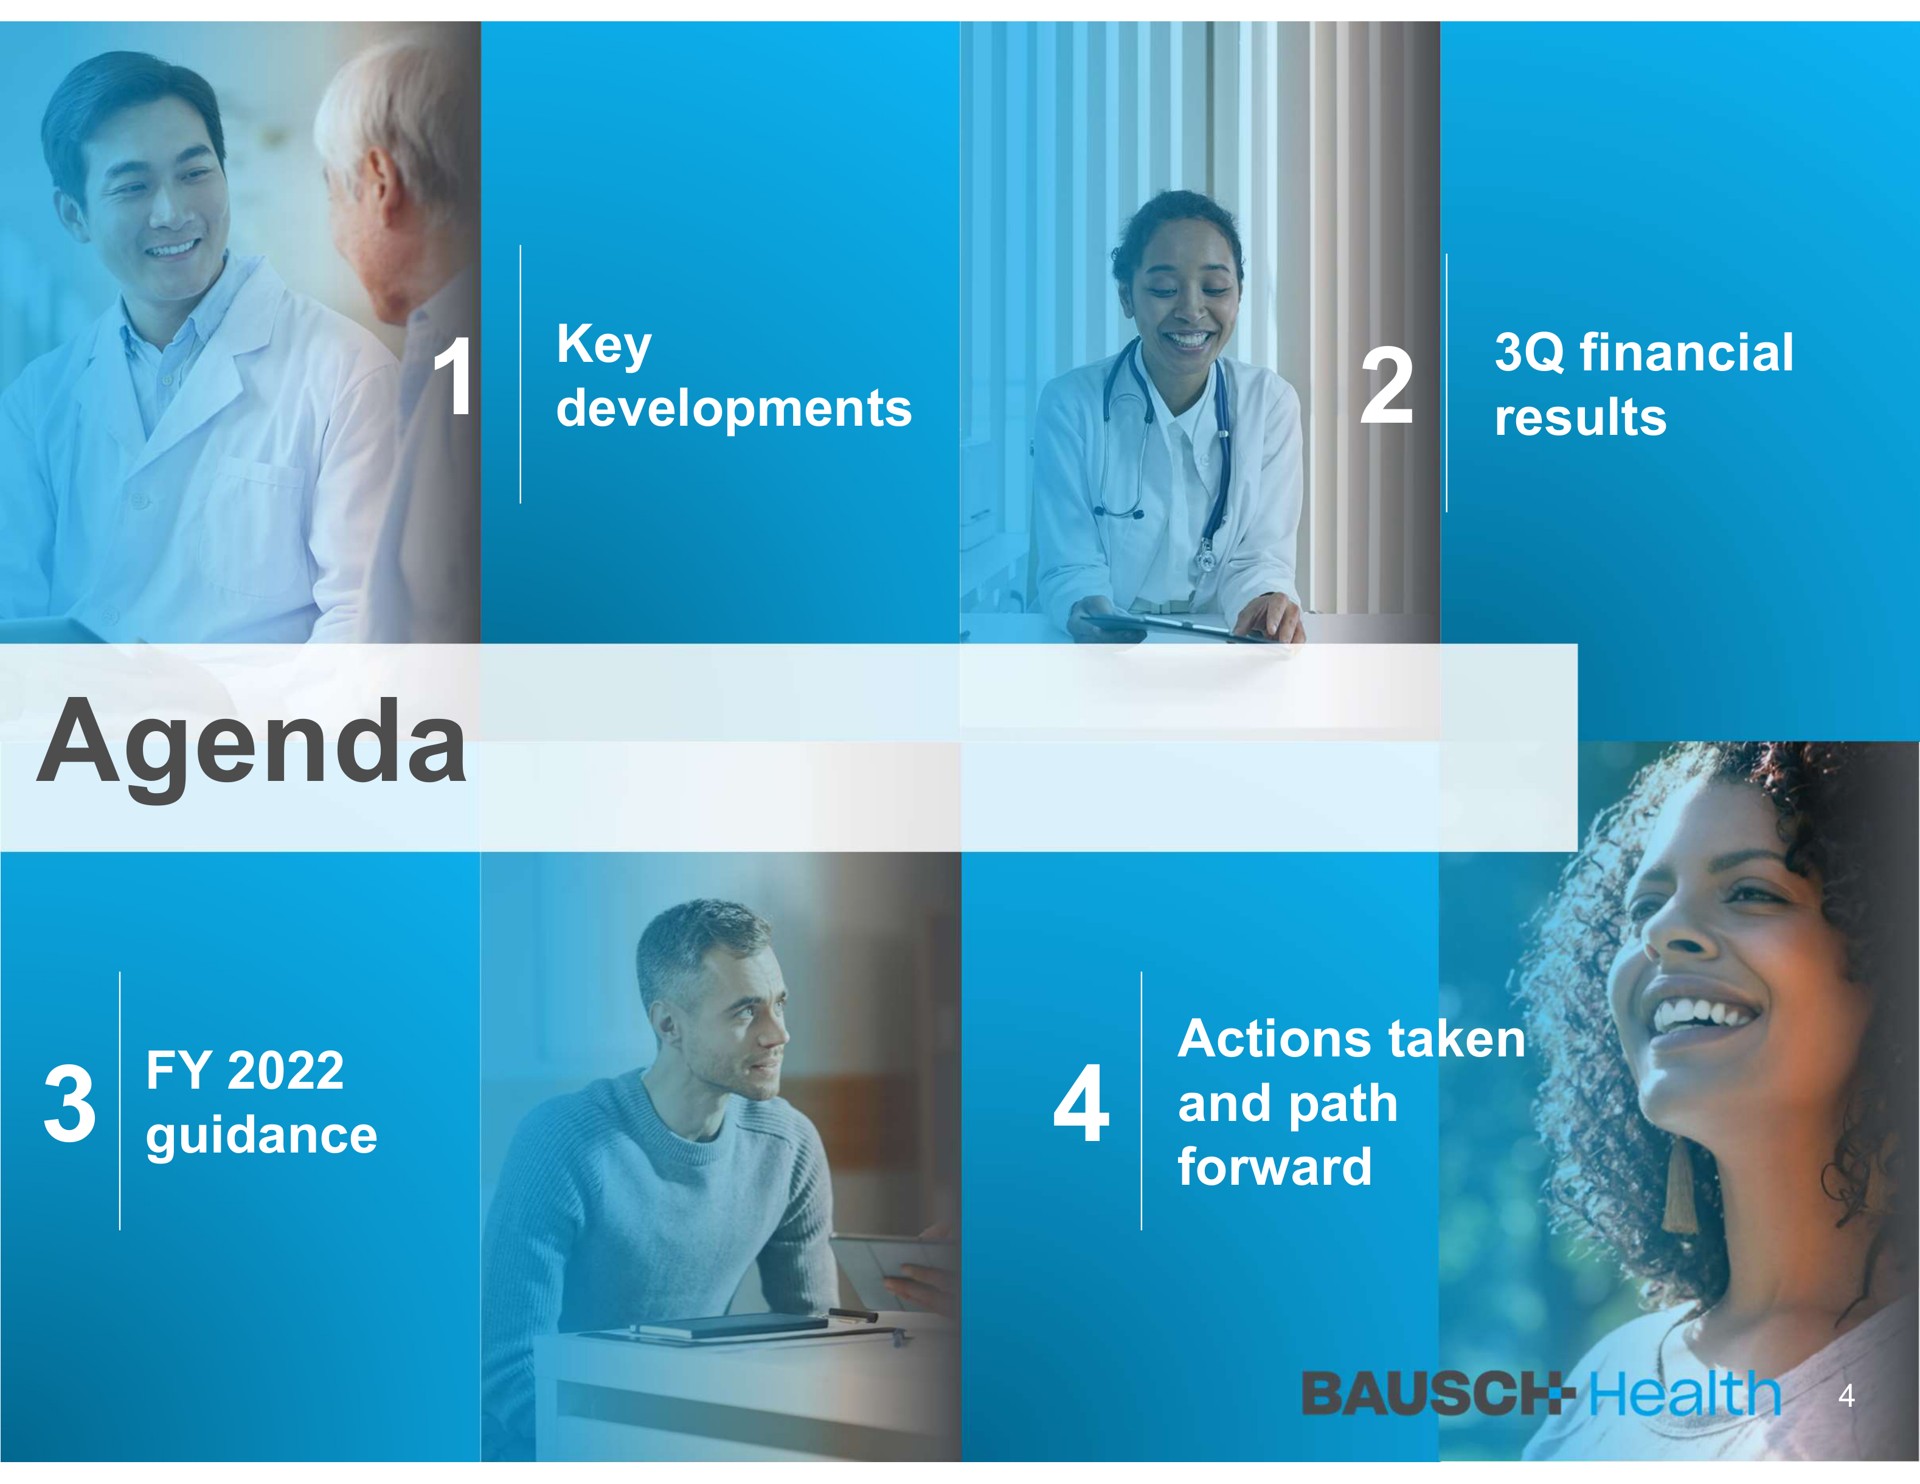 key developments financial results agenda guidance actions taken and path forward cue | Bausch Health Companies